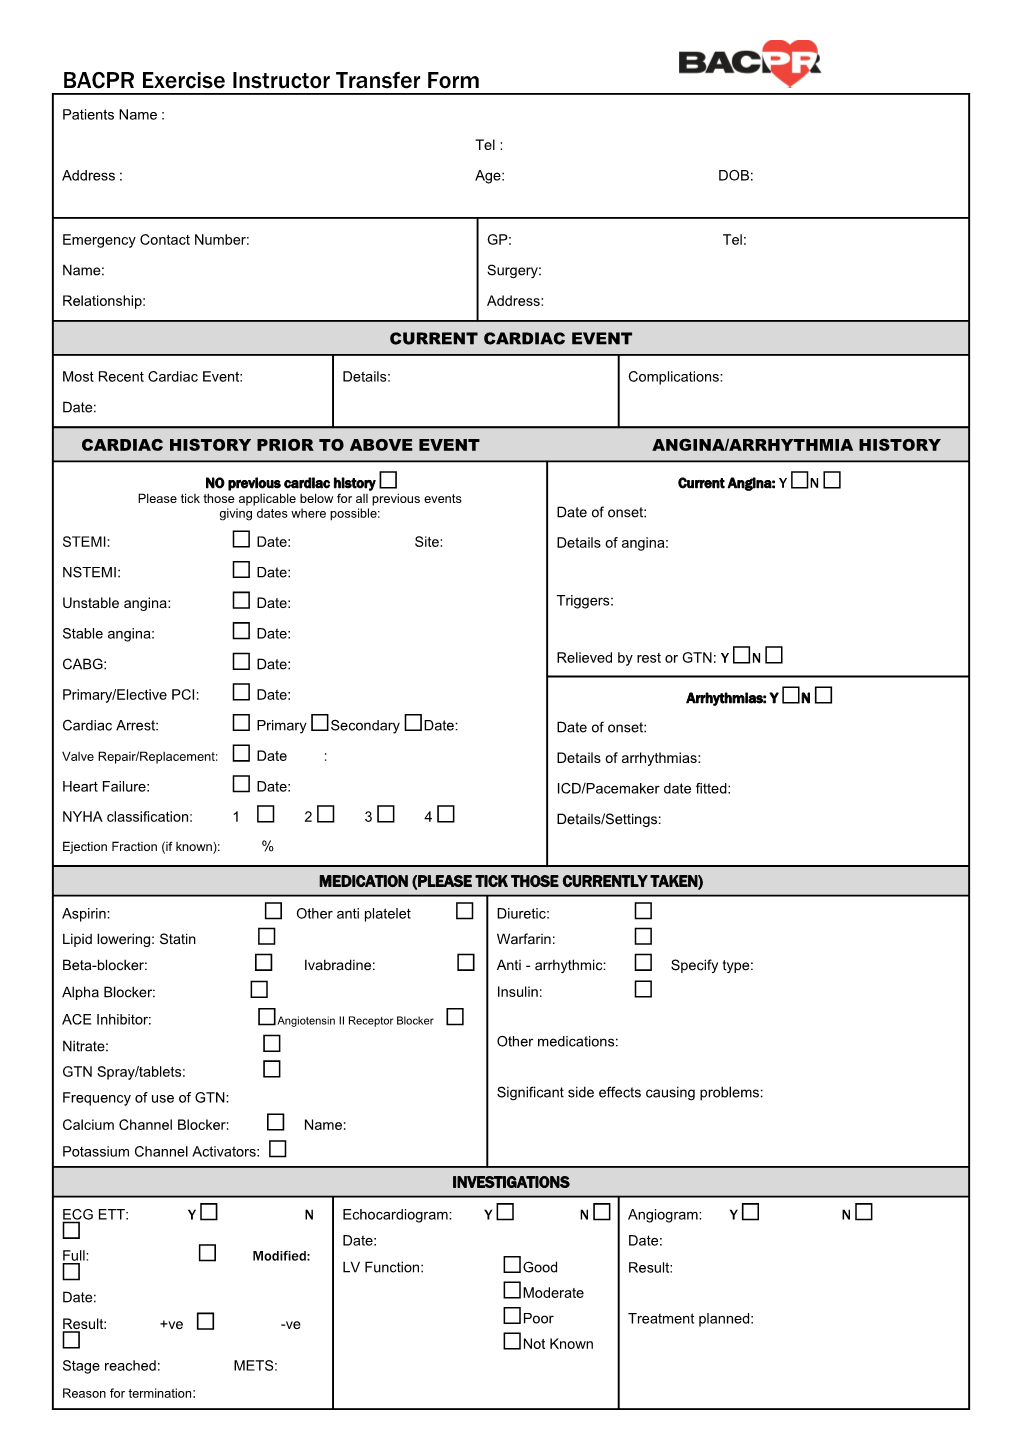 BACPR Exercise Instructor Transfer Form